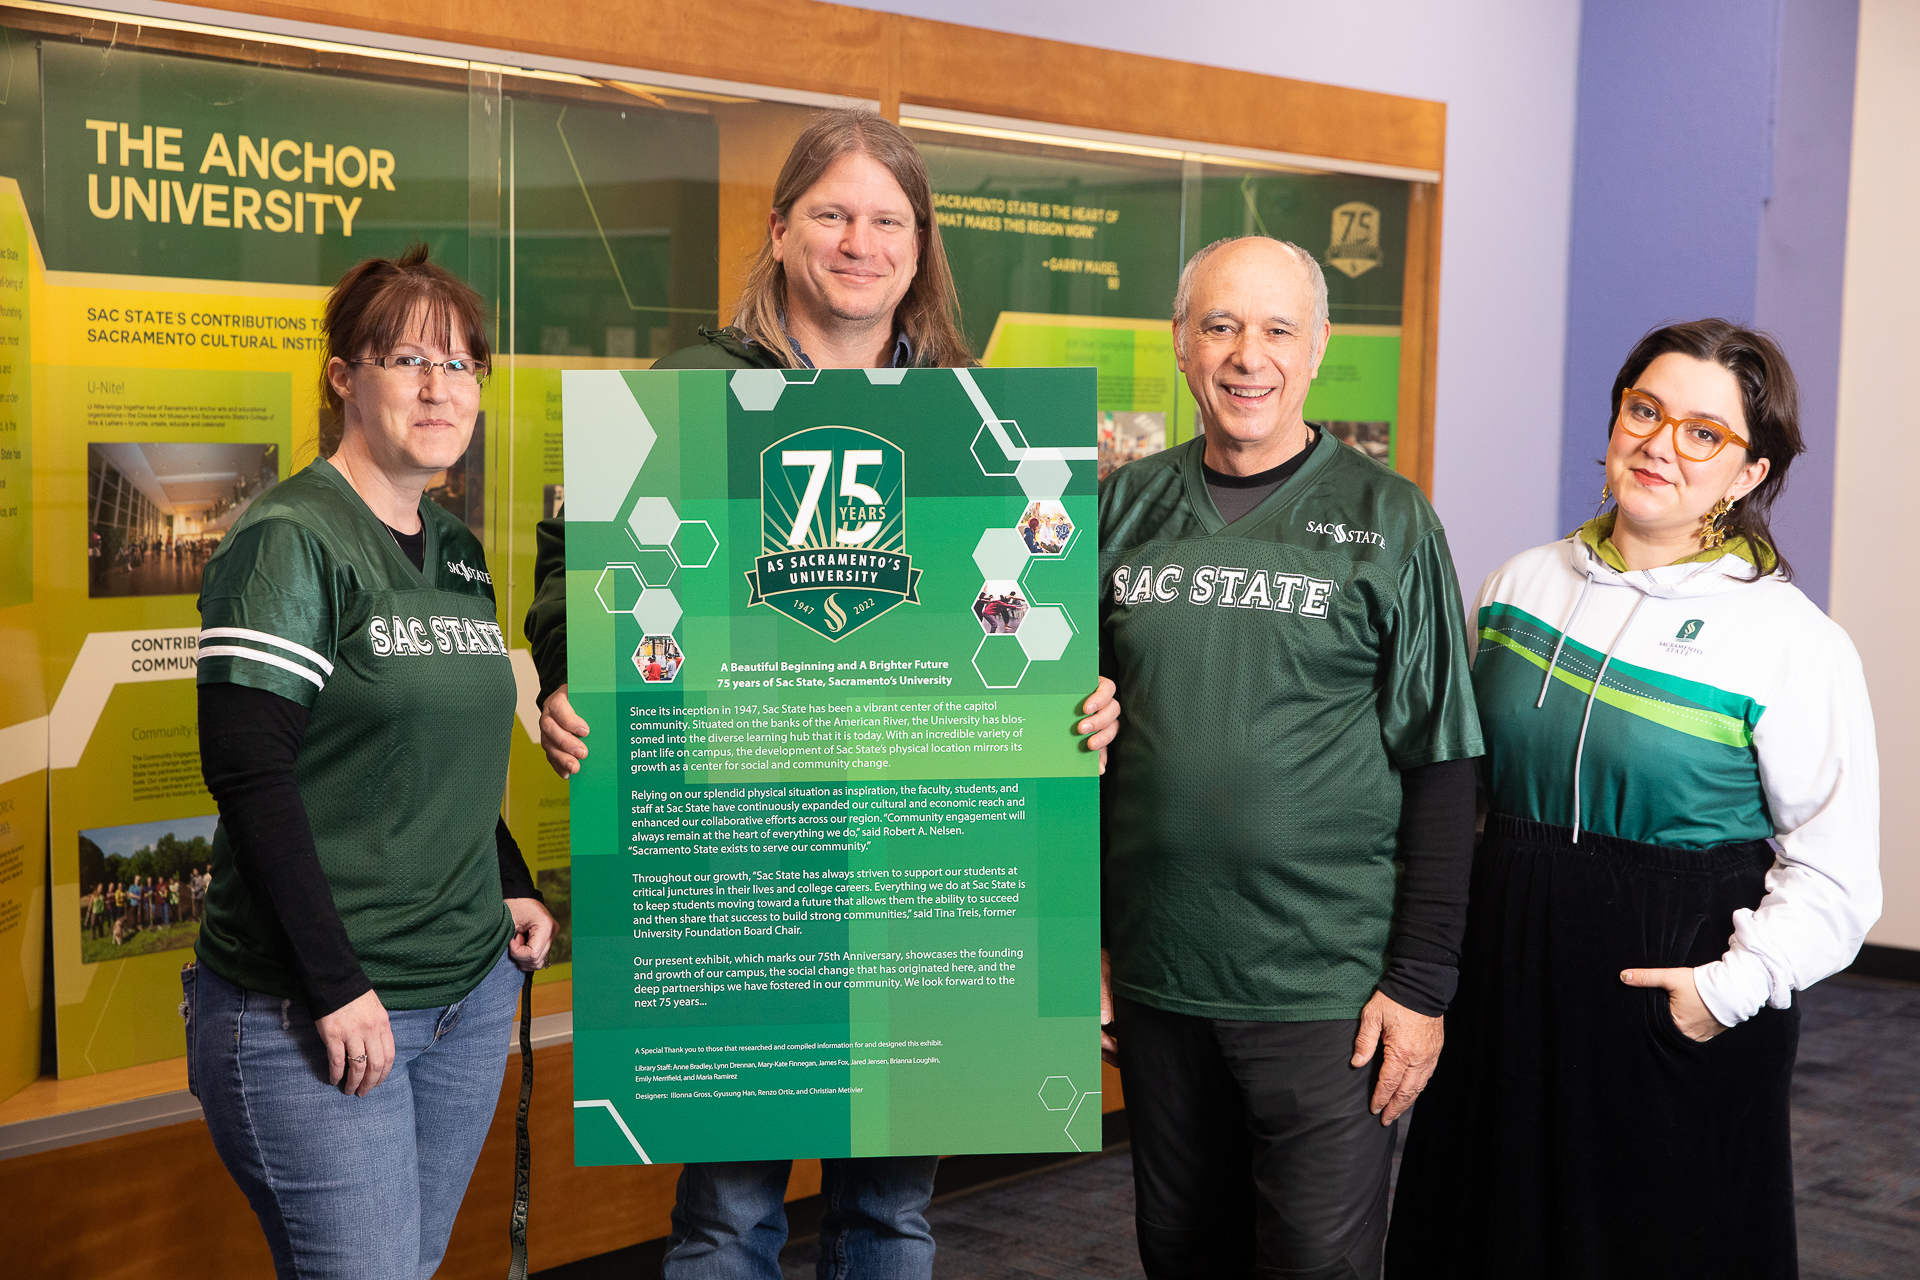 Members of the University Library and Archives staff pose in front of the Sacramento State 75th Anniversary exhibit display.